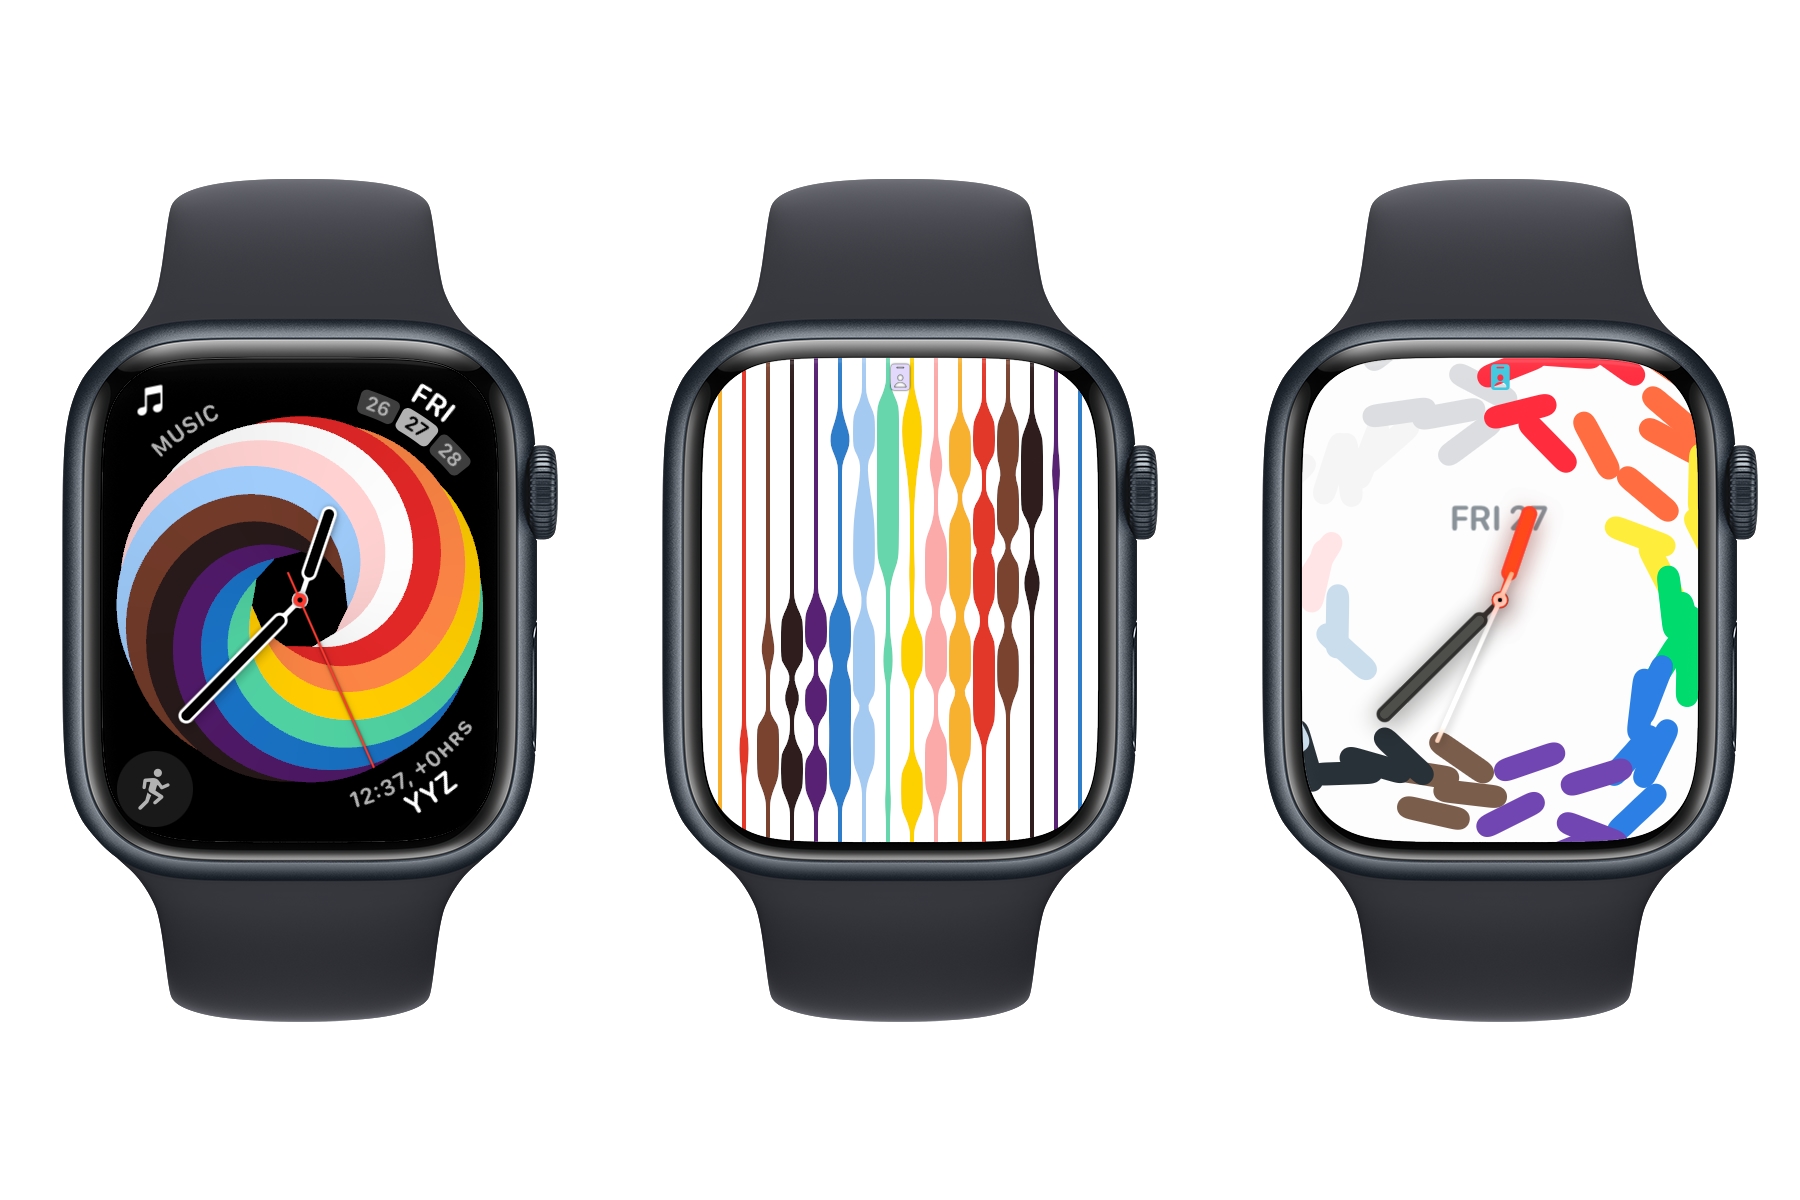 I wish Apple would add a watch face like Nike Digital but with